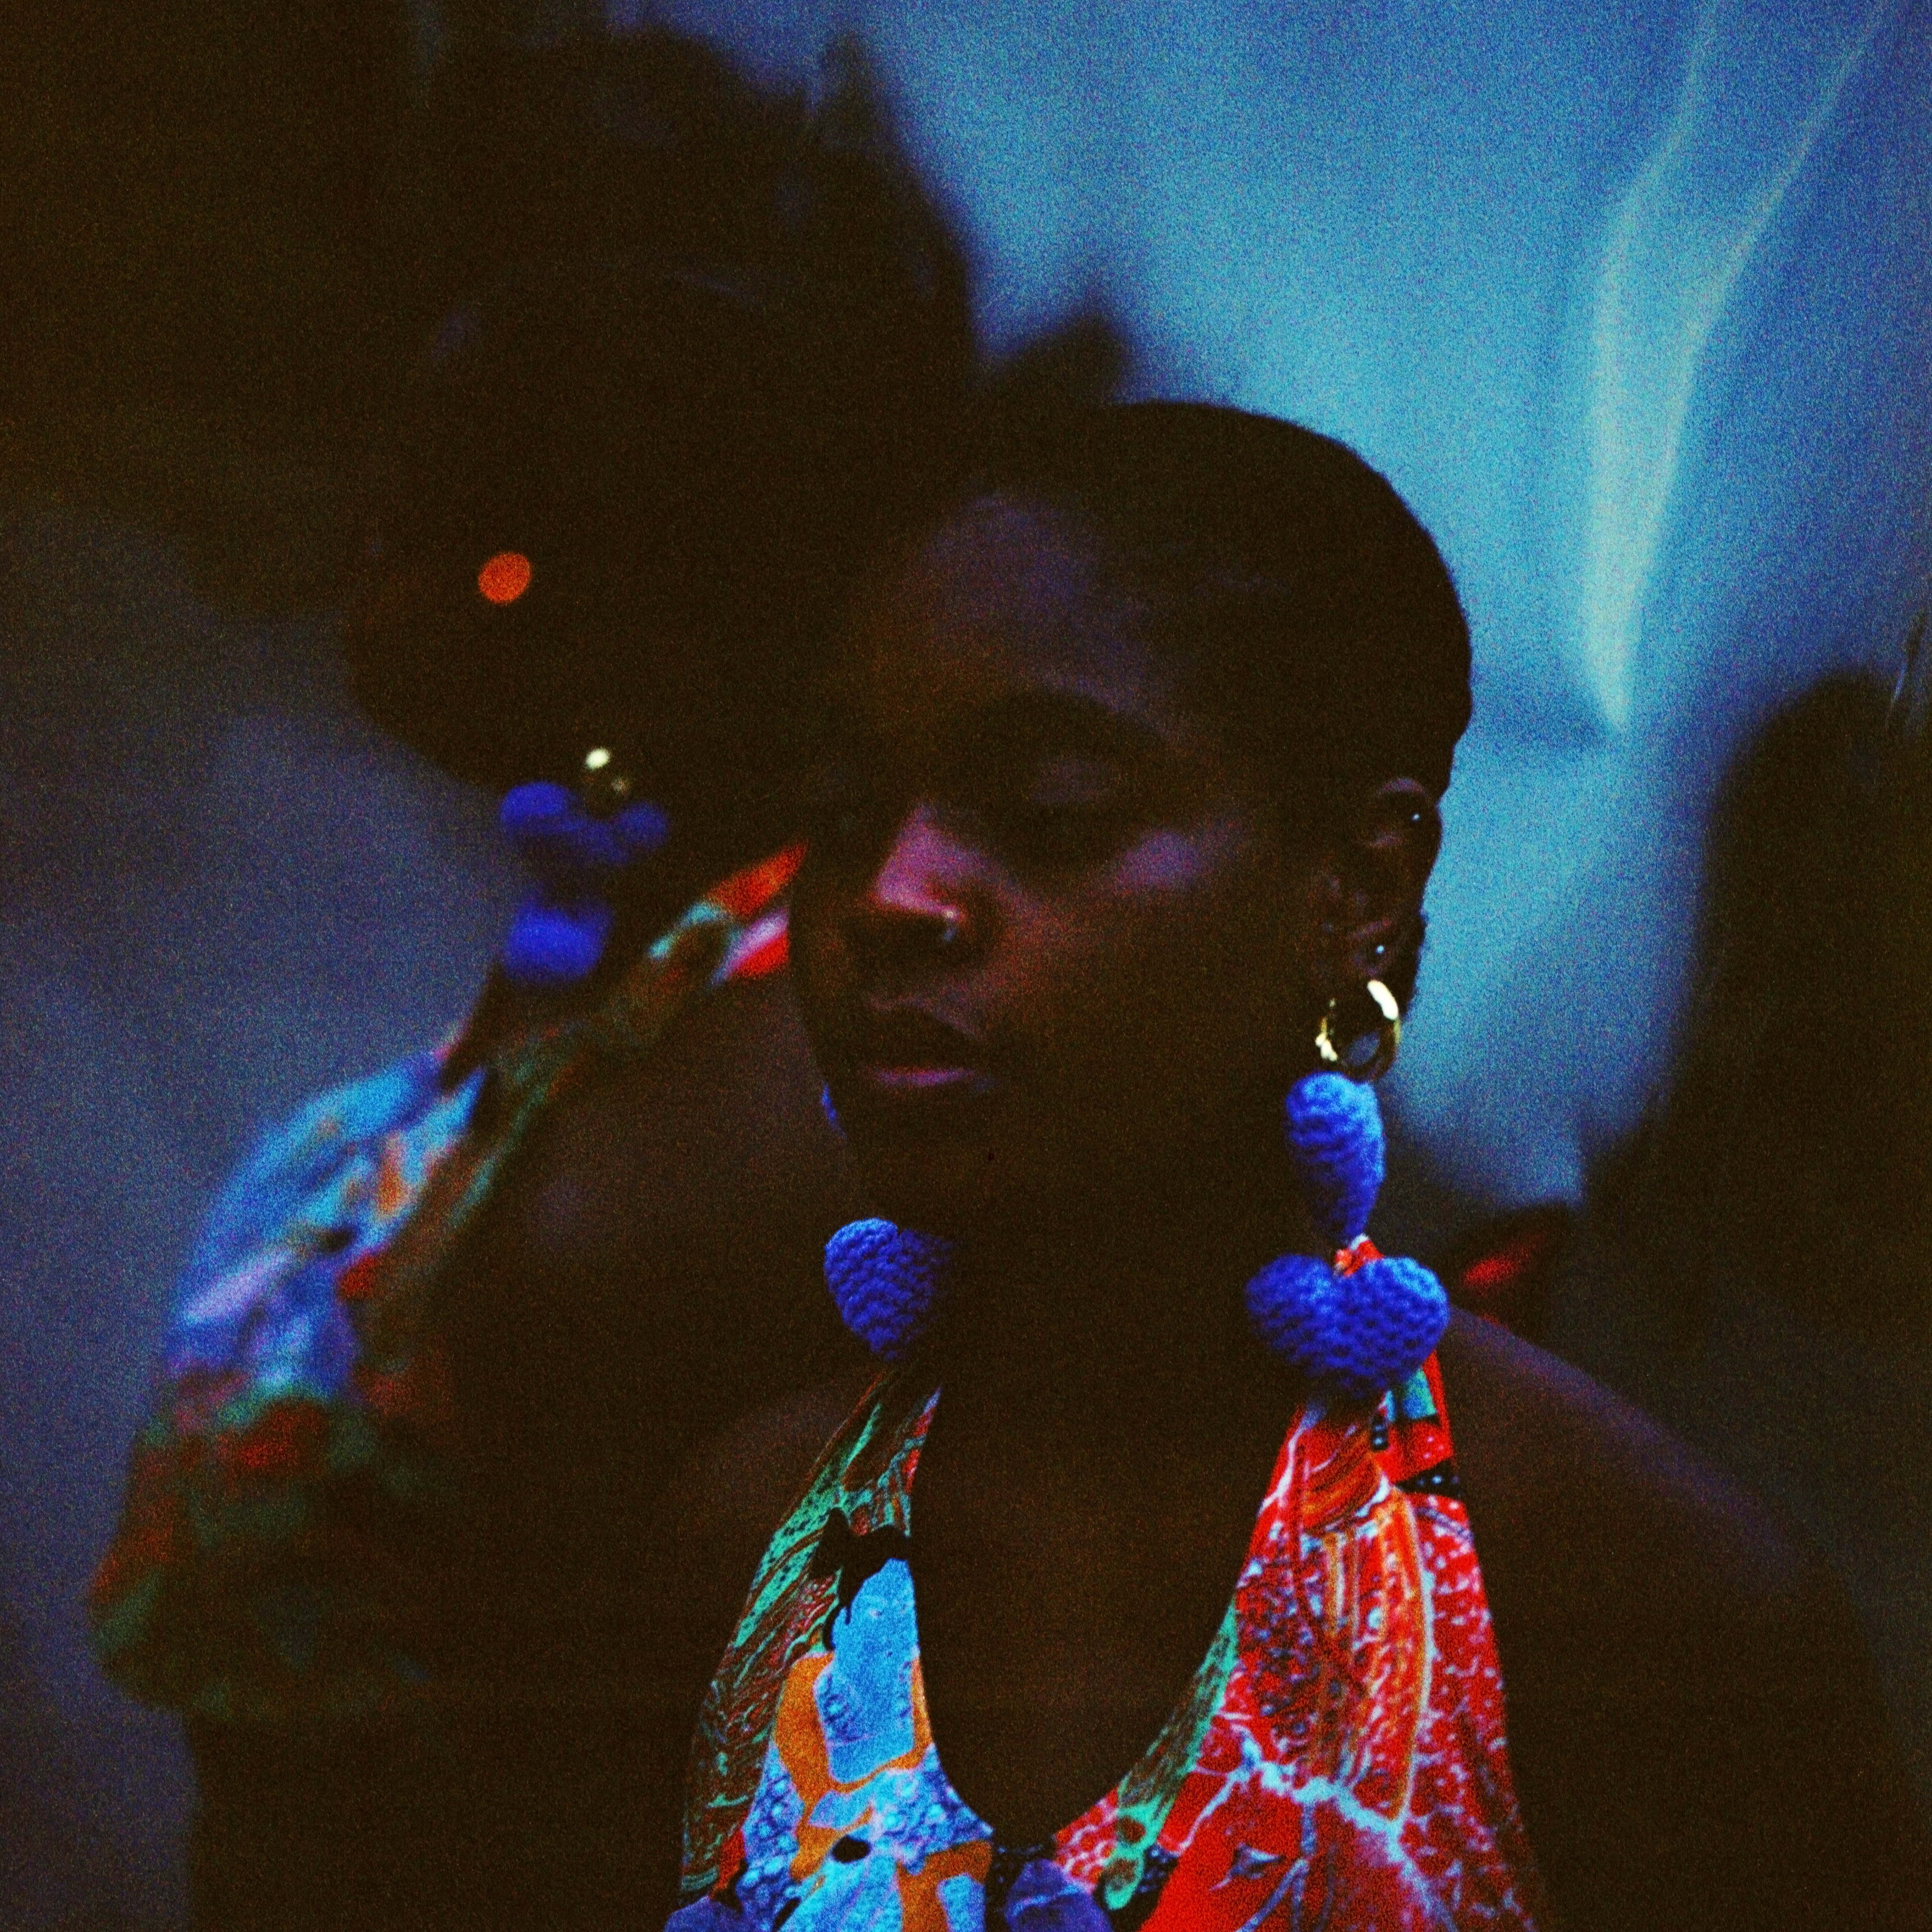 Neta, a deep brown skinned person, wears a colorful halter top and large lavender heart-shaped crochet earrings as she stands in front of a reflective backdrop that doubles and distorts the image of her profile..